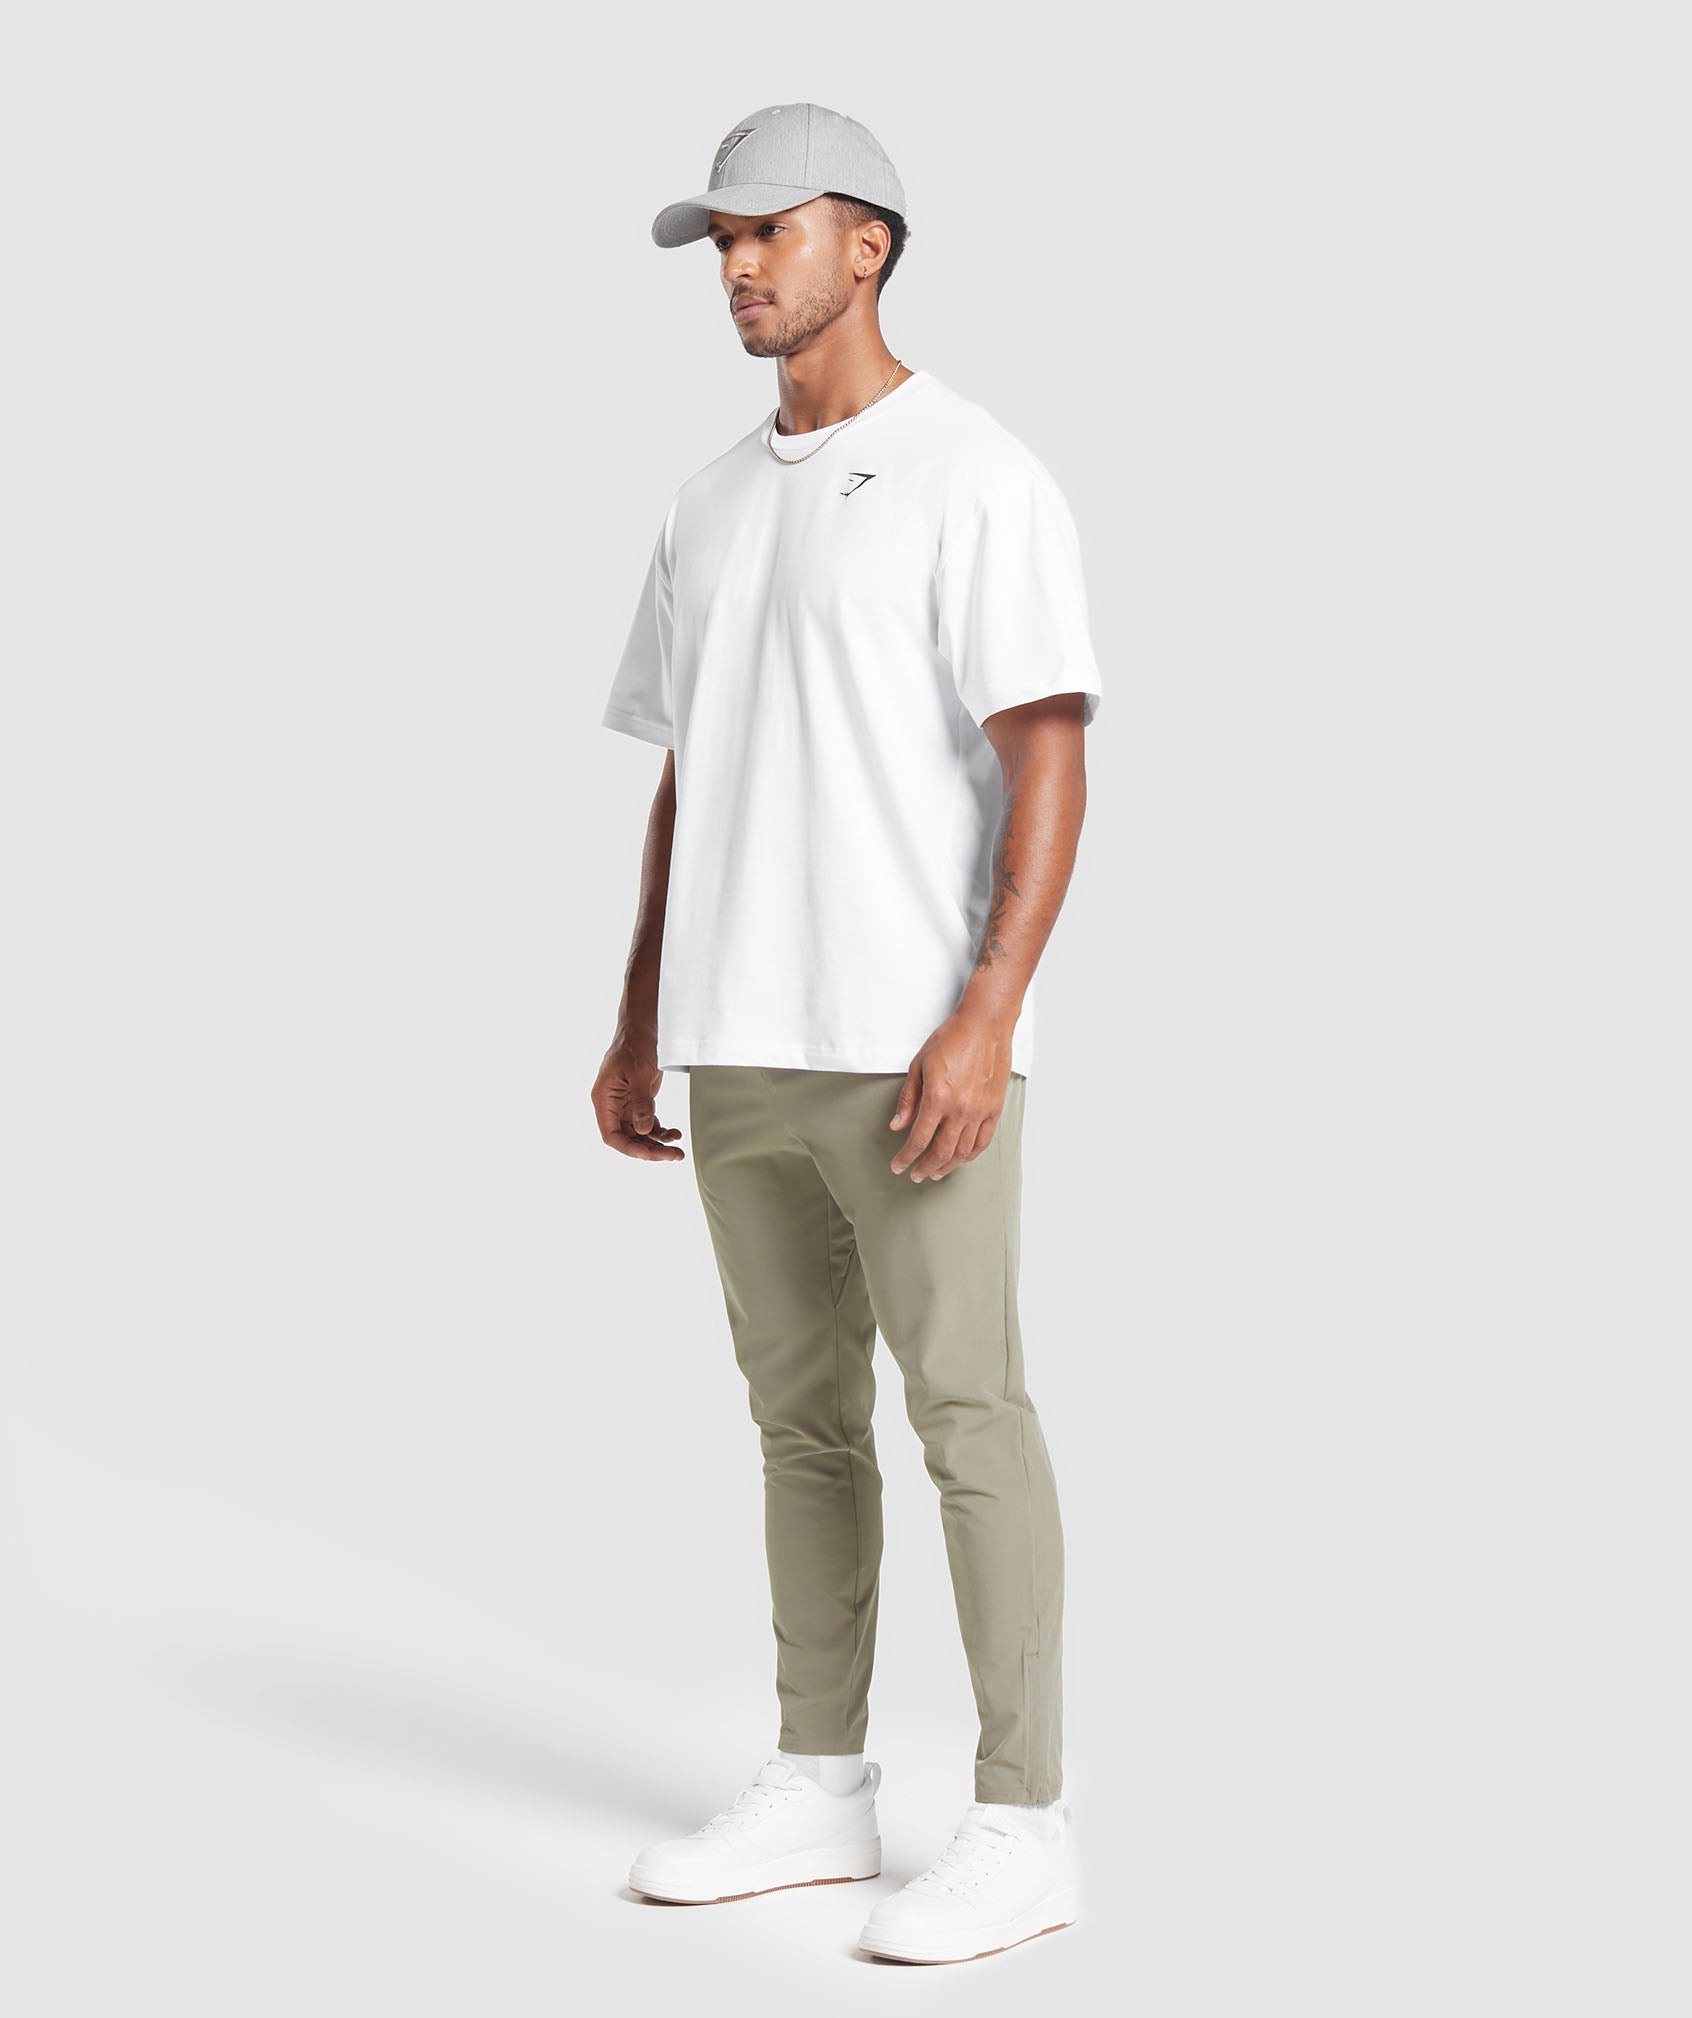 Arrival Woven Joggers in Linen Brown - view 4